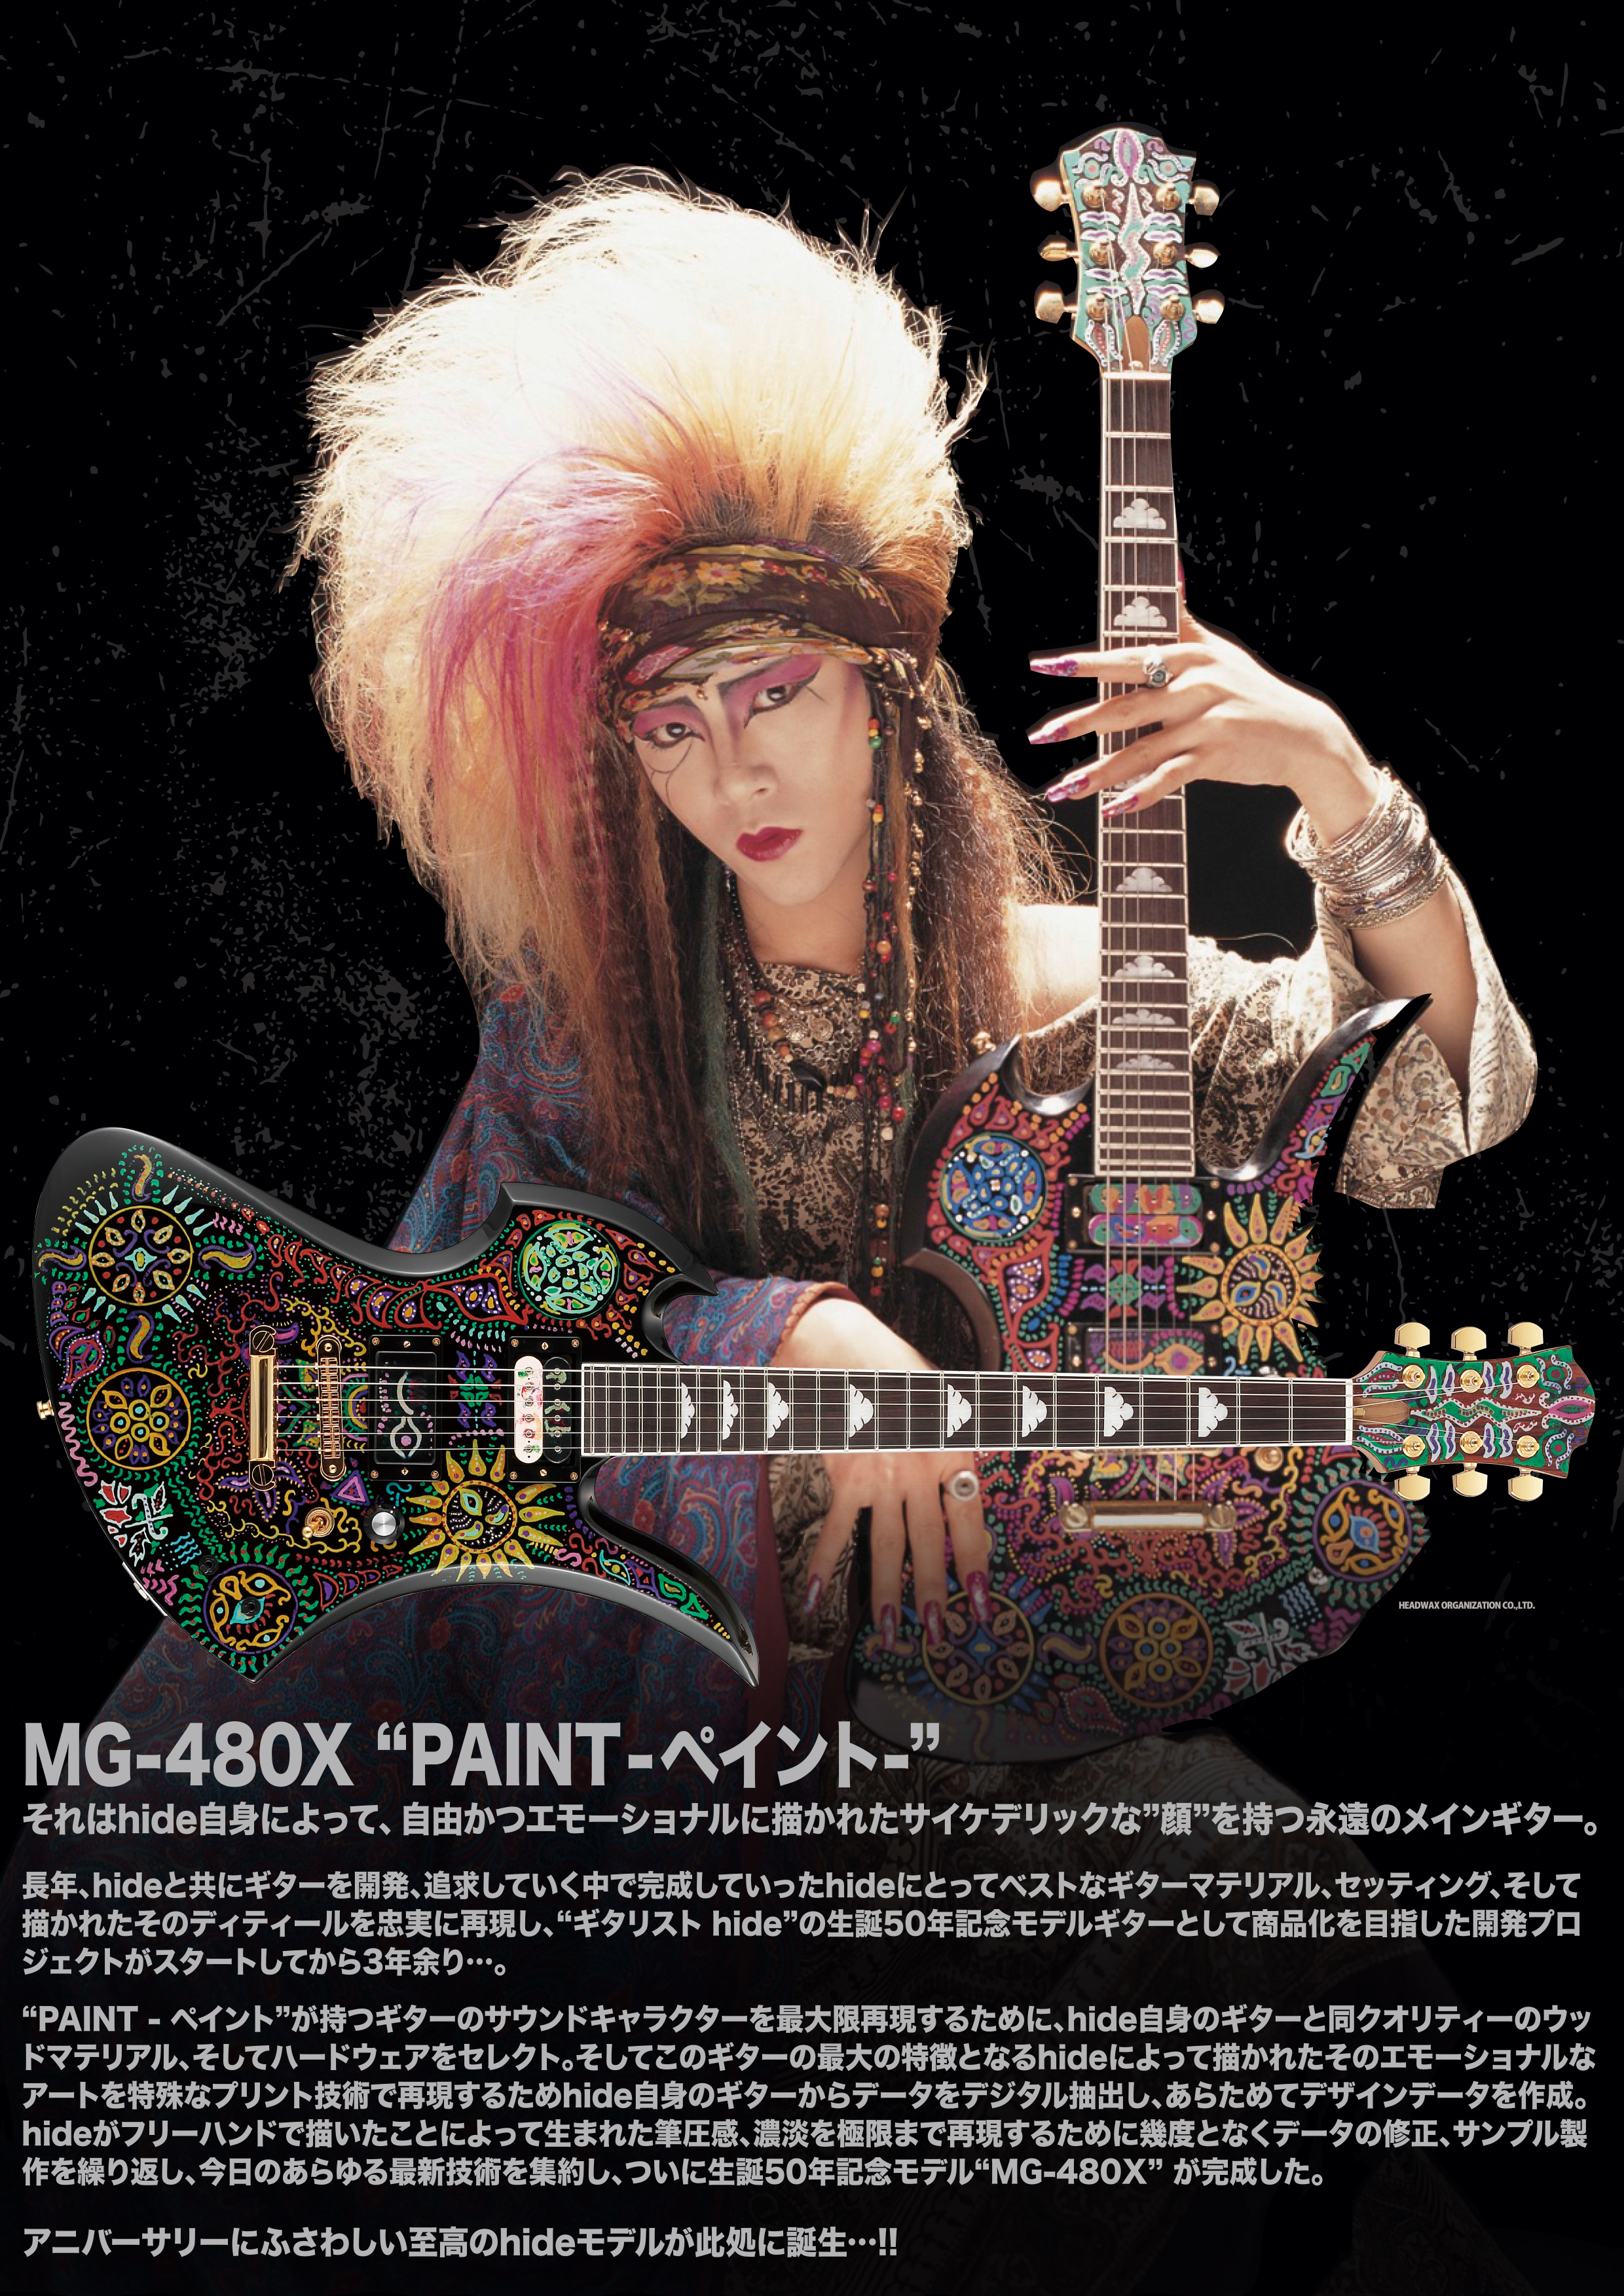 hide 50th Anniversary Model “MG-480X” | FERNANDES OFFICIAL WEB SITE